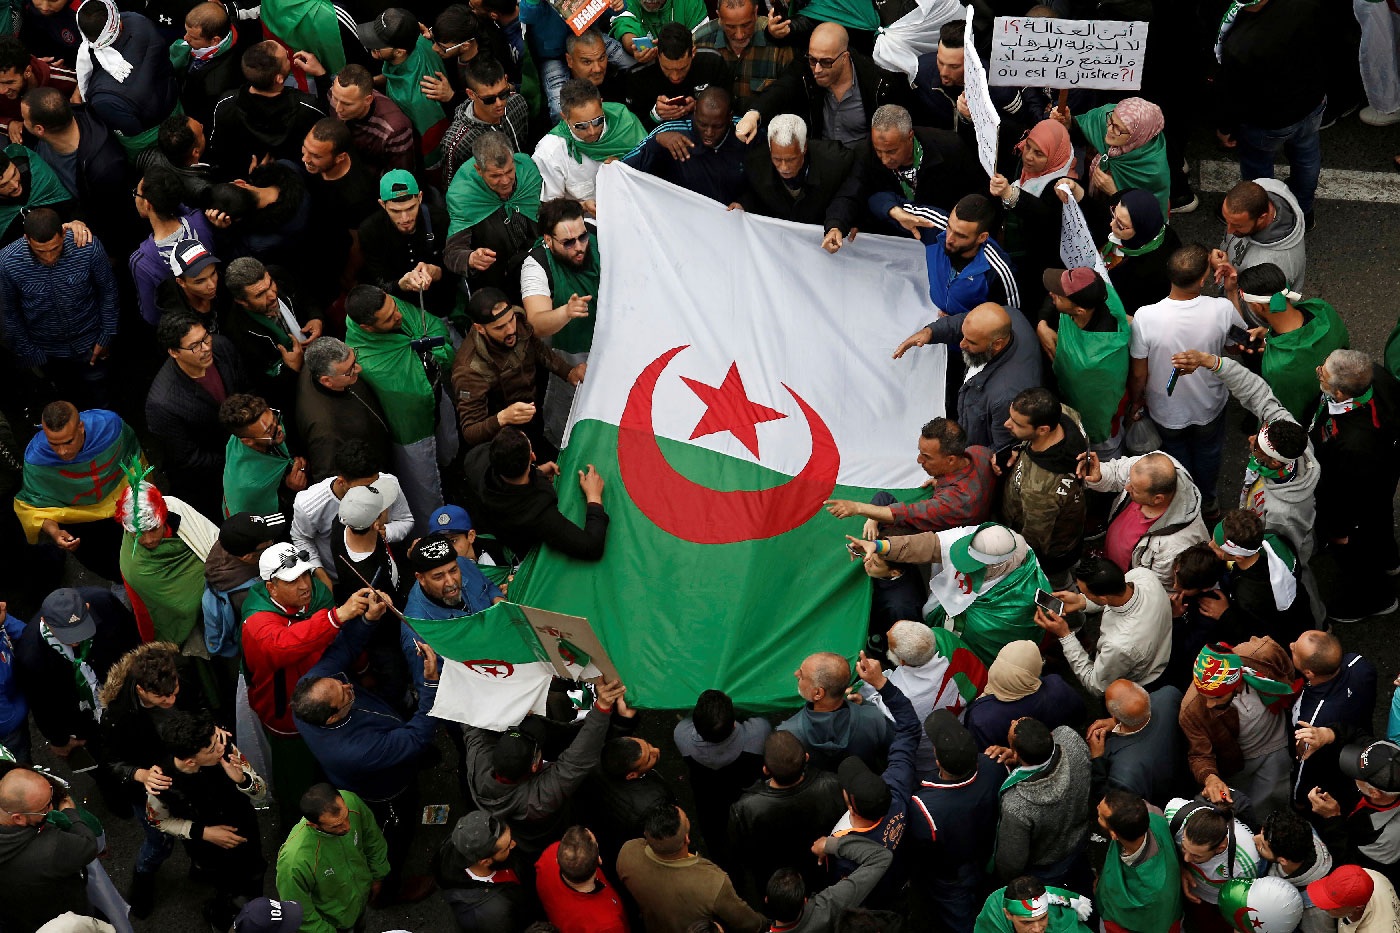 Demonstrators hold flags and banners as they return to the streets in Algiers